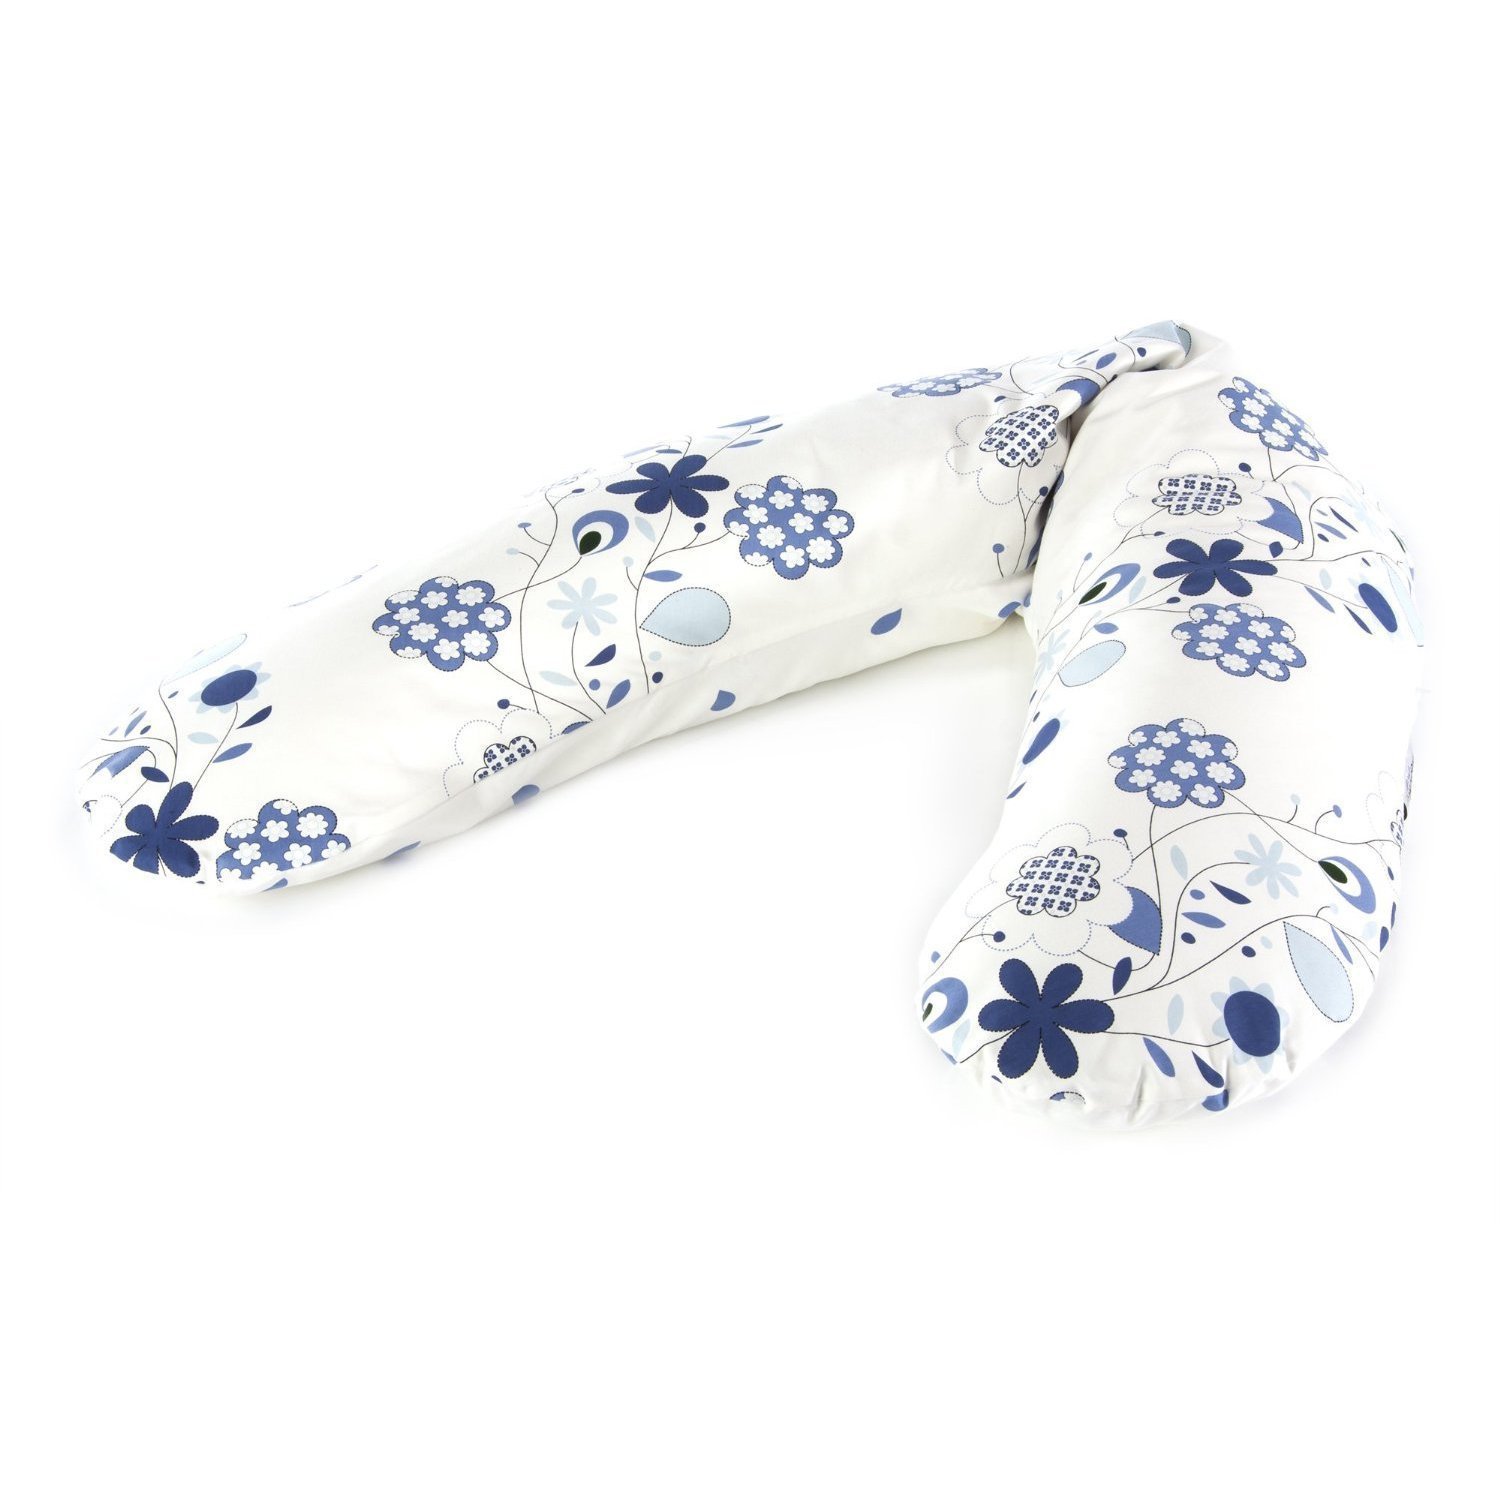 Floral Vine Original Theraline Nursing Pillow with Cover